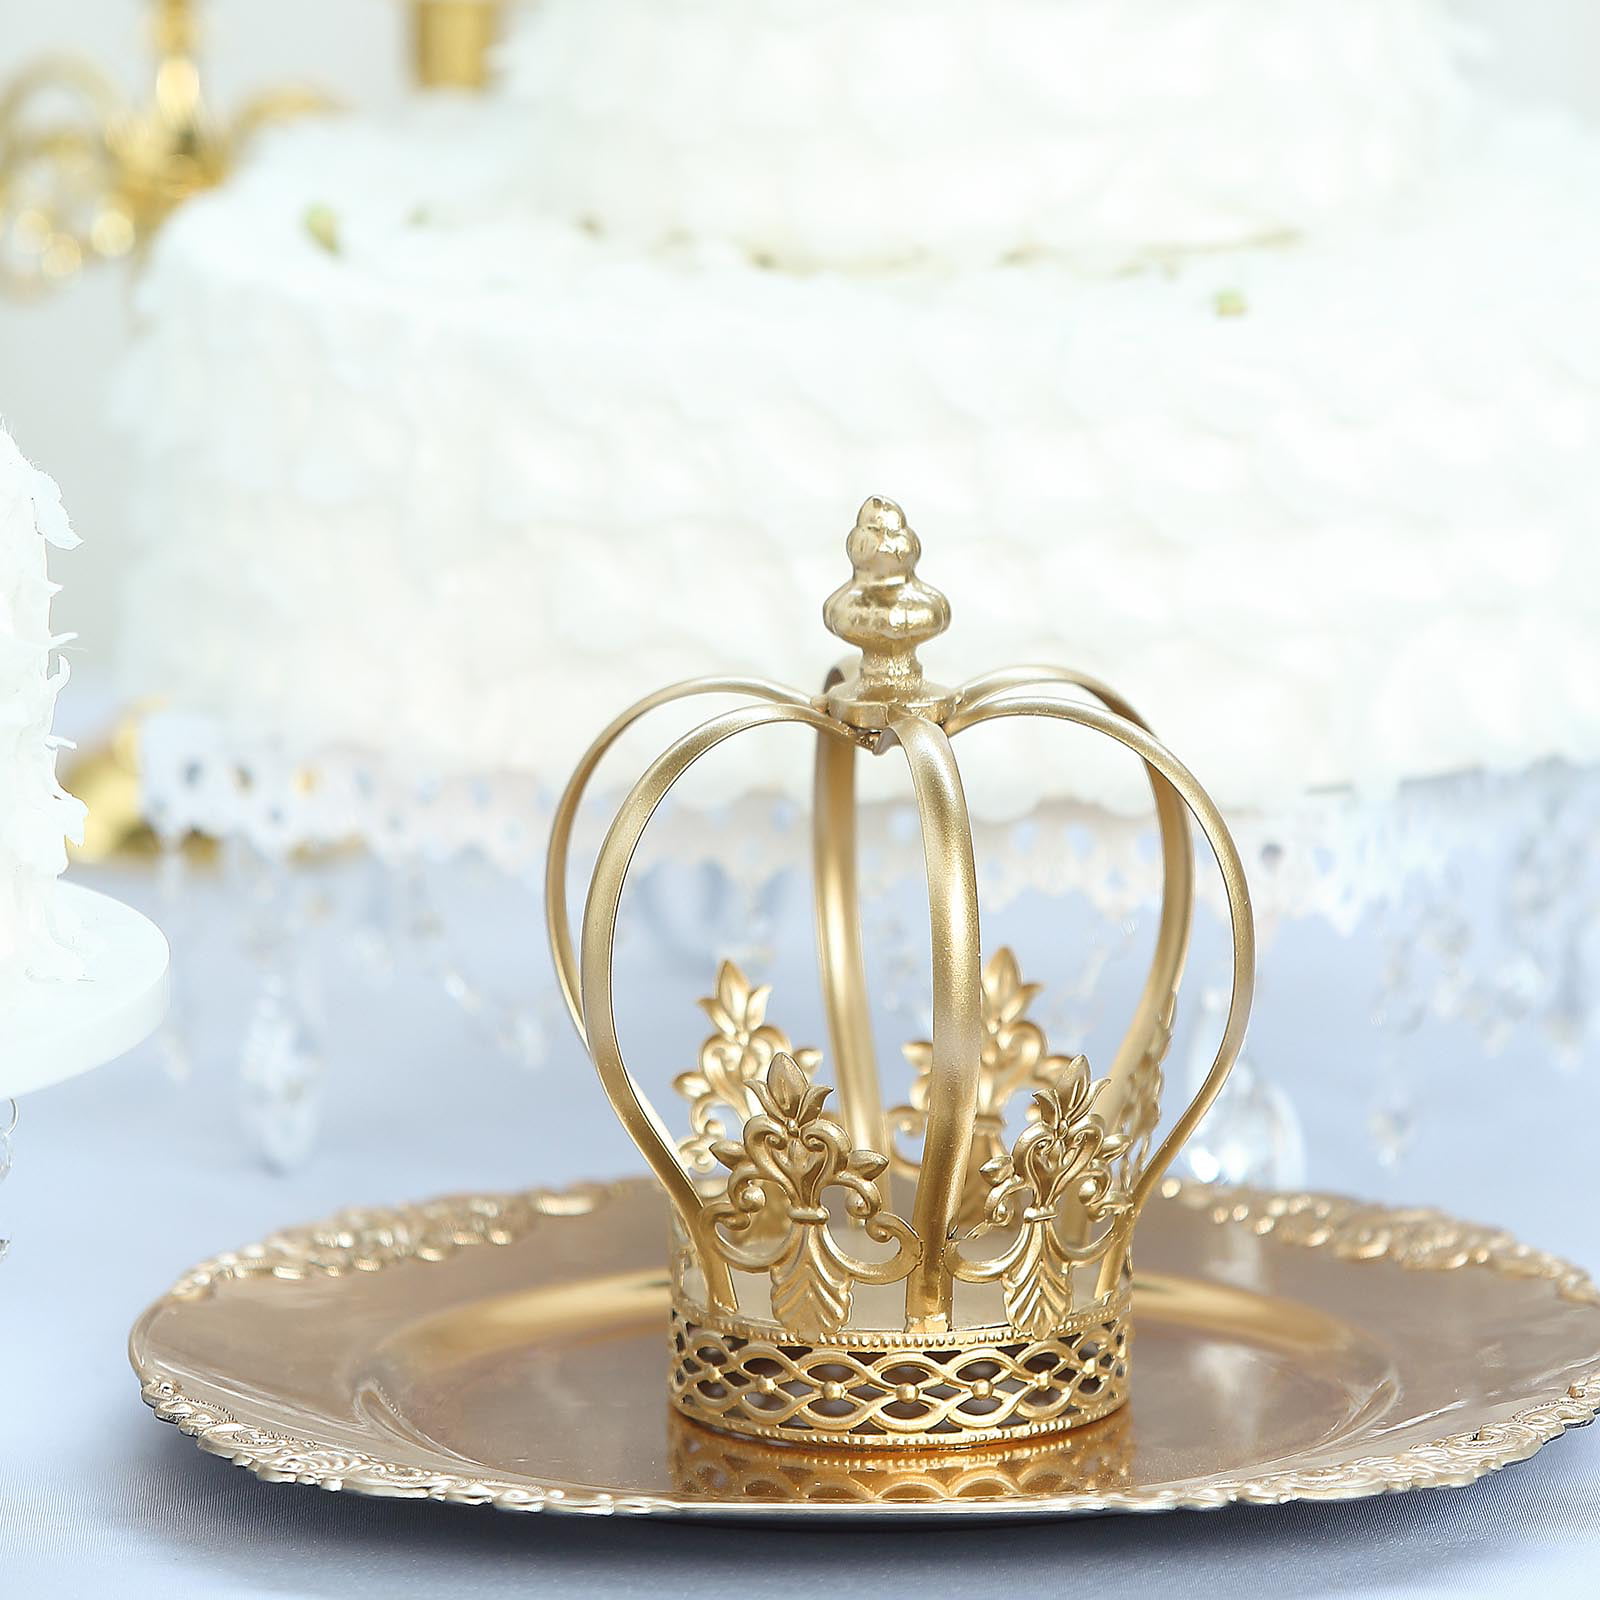 BalsaCircle 4-Inch wide Gold Metal Crown Cake Topper - Princess Knight  Prince Kids Birthday Party Centerpiece Decorations